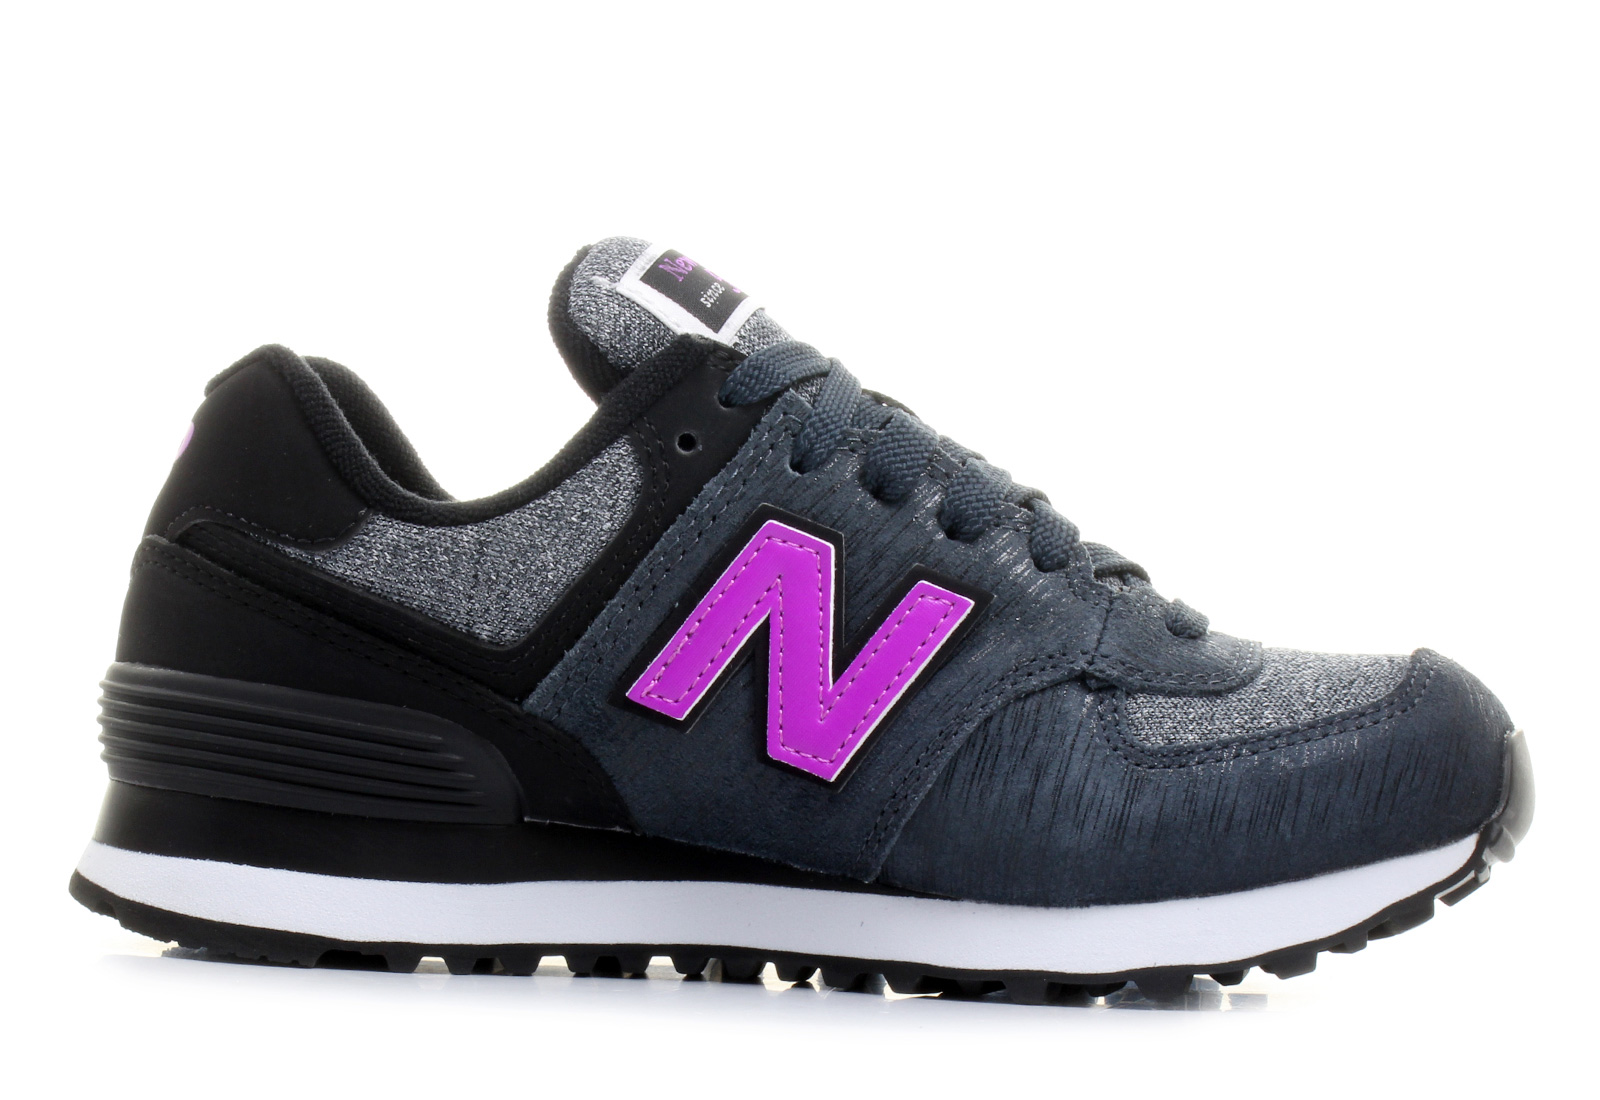 New Balance Shoes - Wl574 - WL574WTB - Online shop for sneakers, shoes and boots